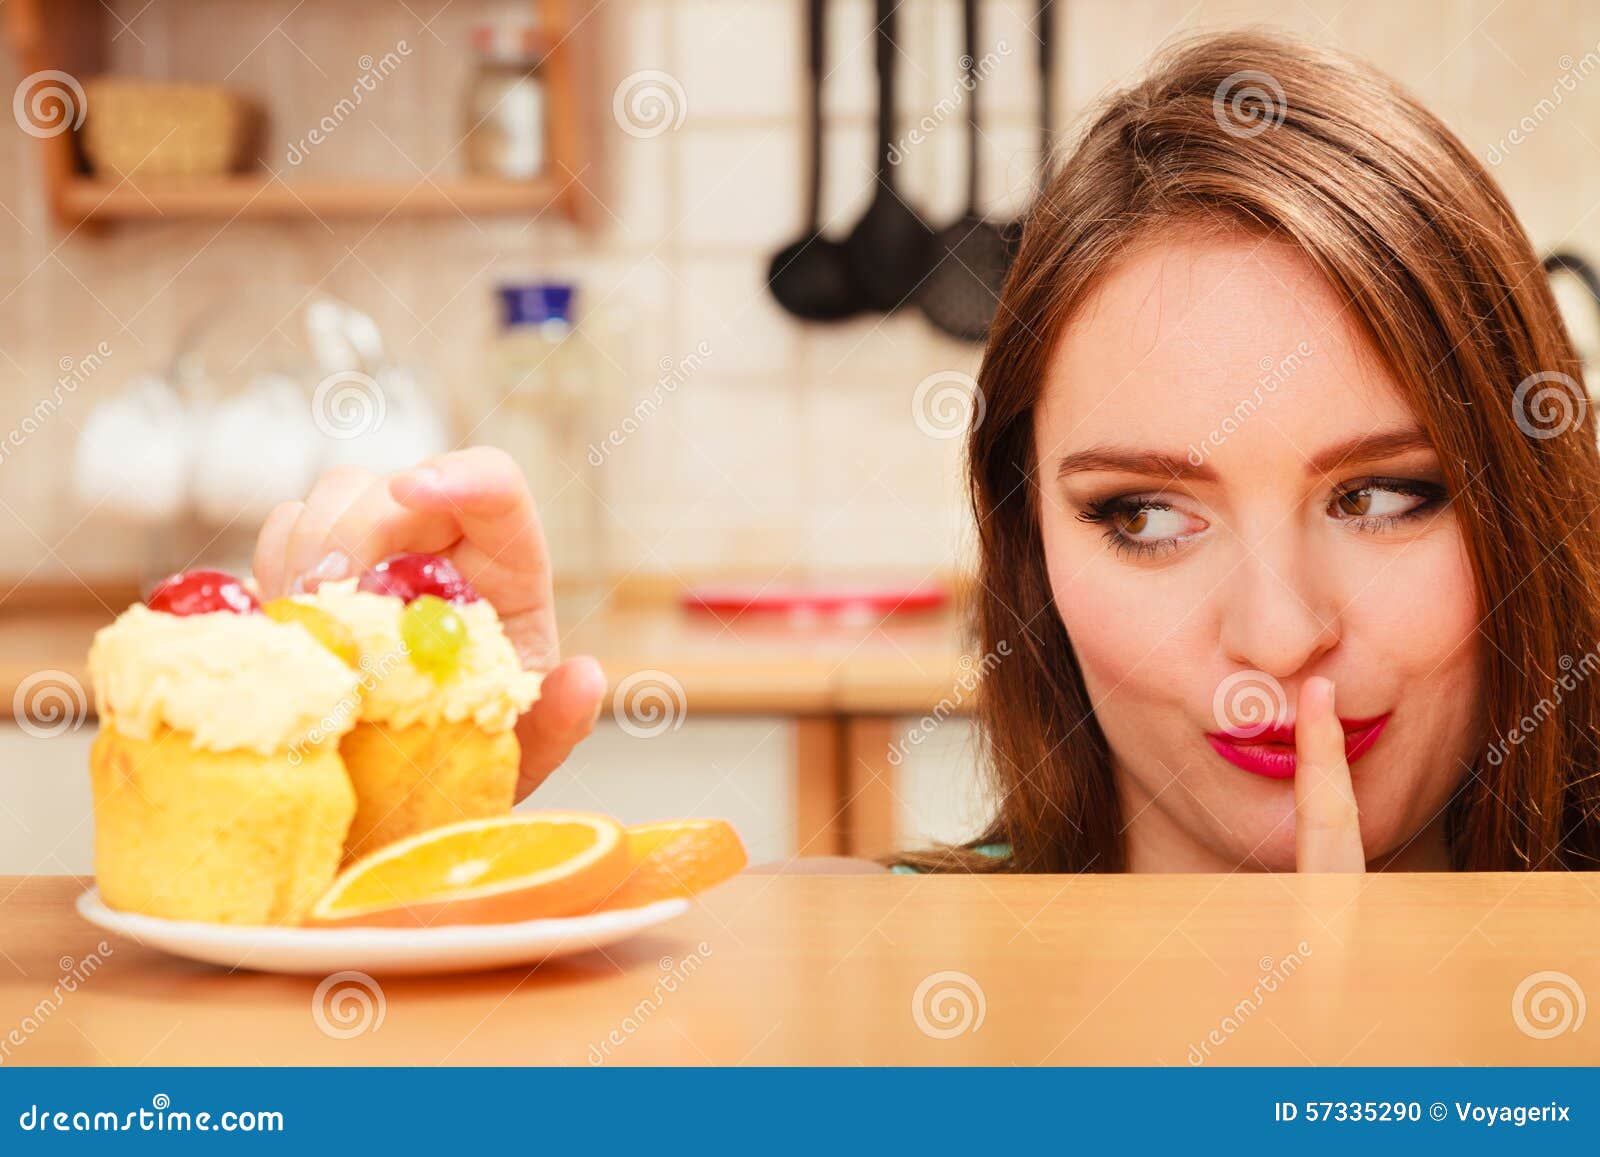 woman eating cake showing quiet sign. gluttony.